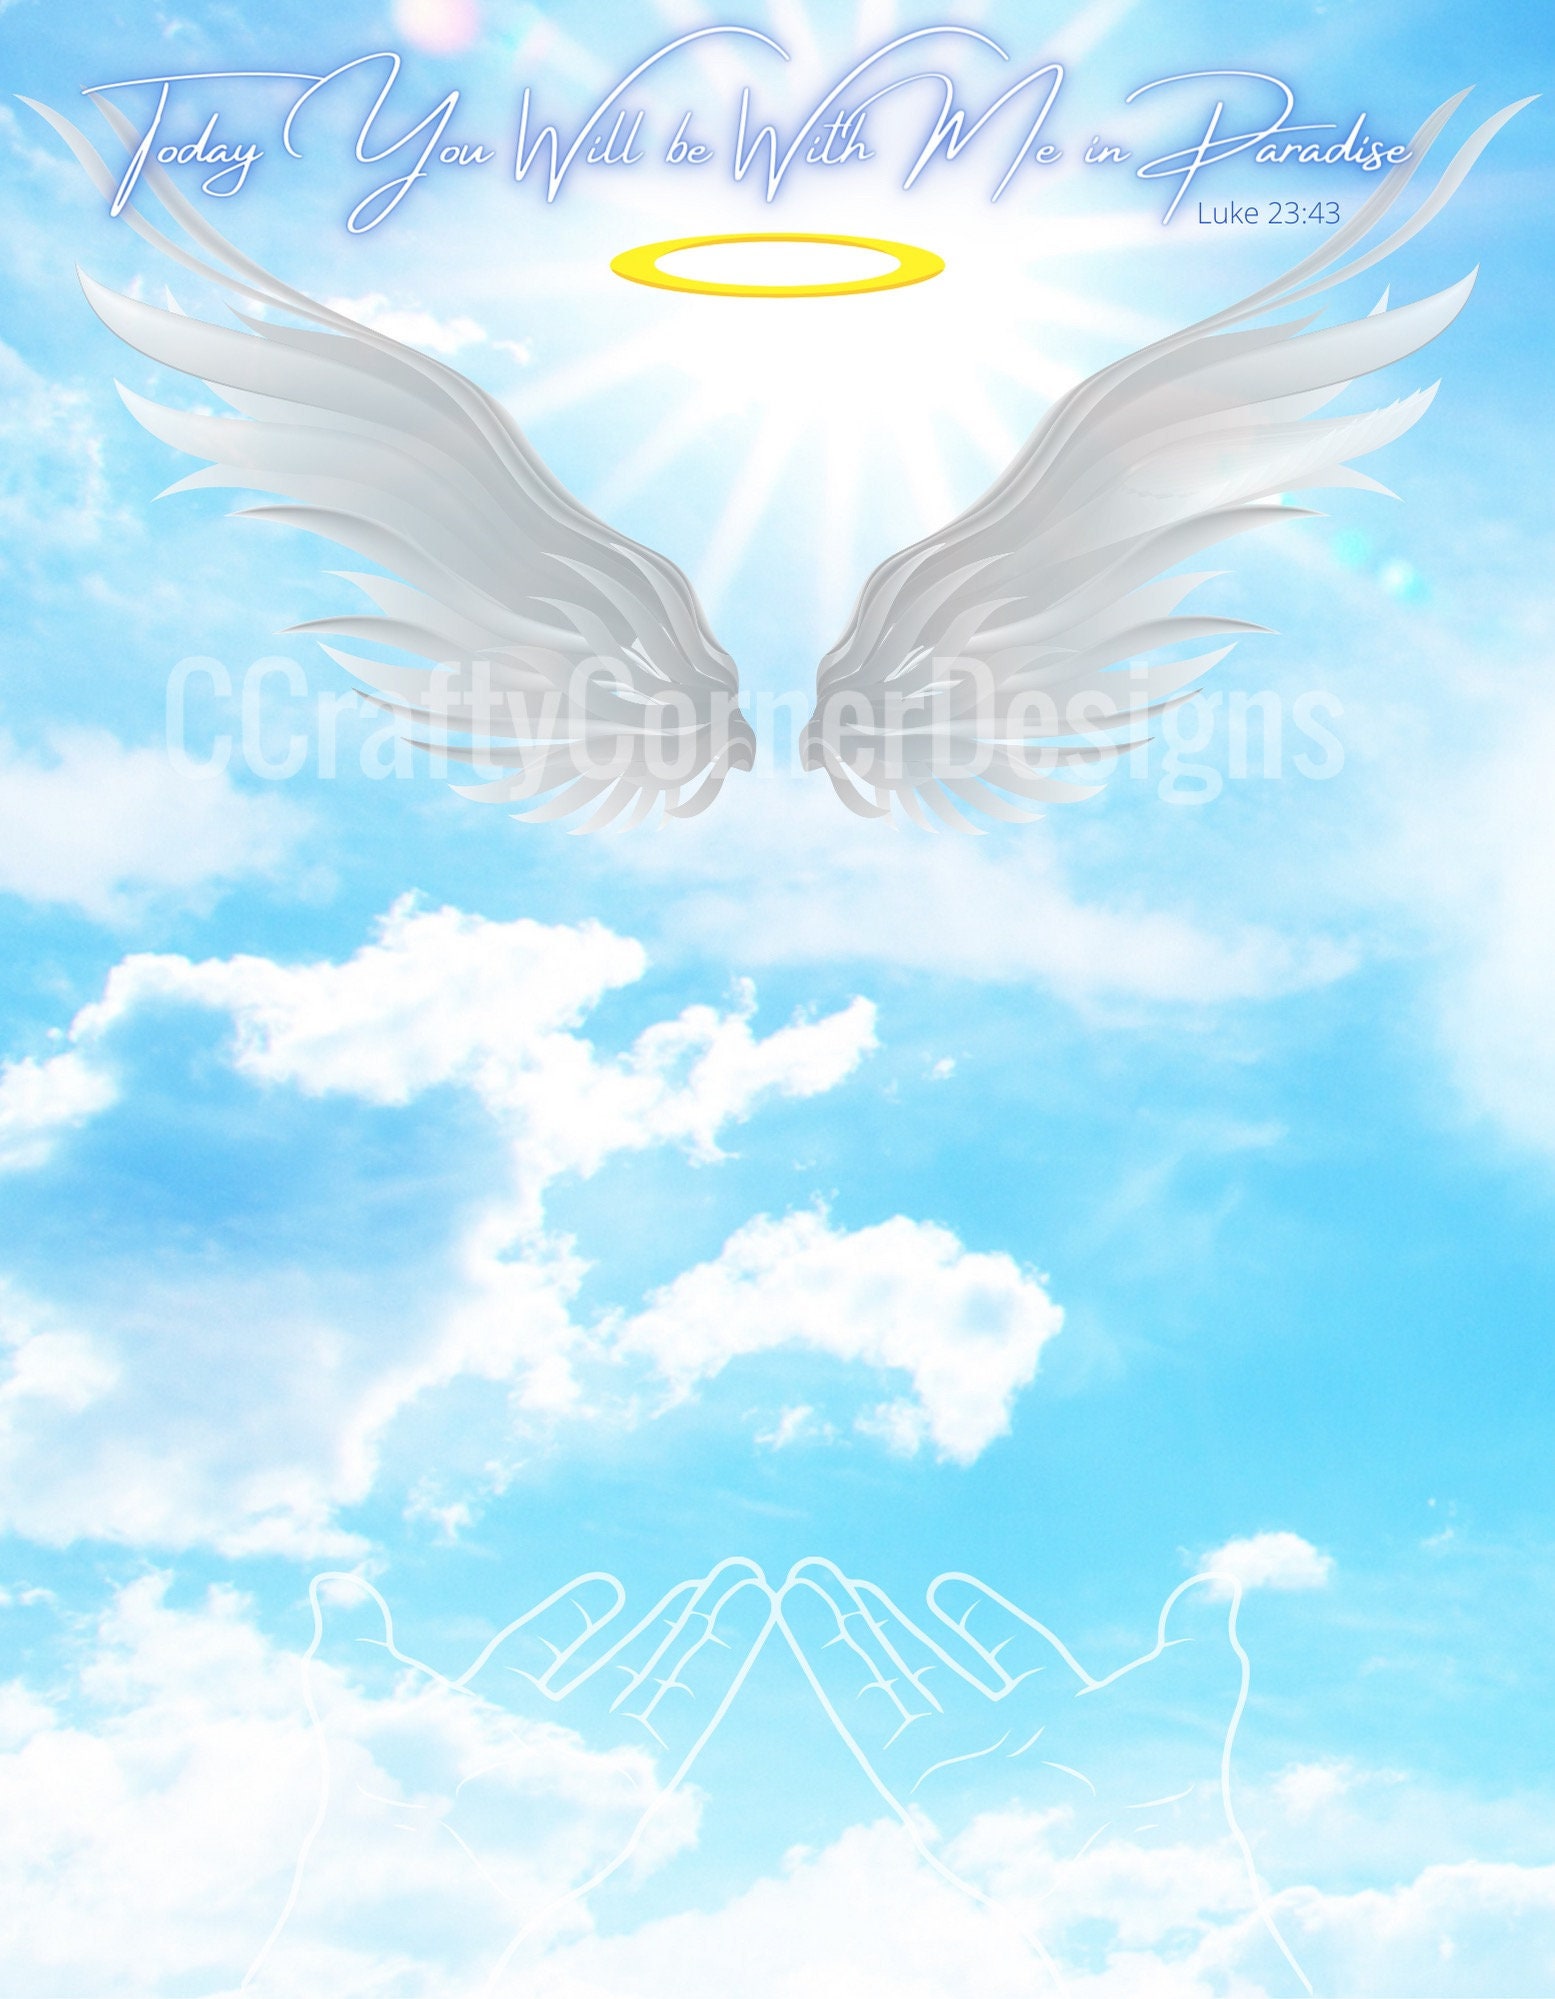 Rip Wings Background Today You Will Be With Me in Paradise - Etsy